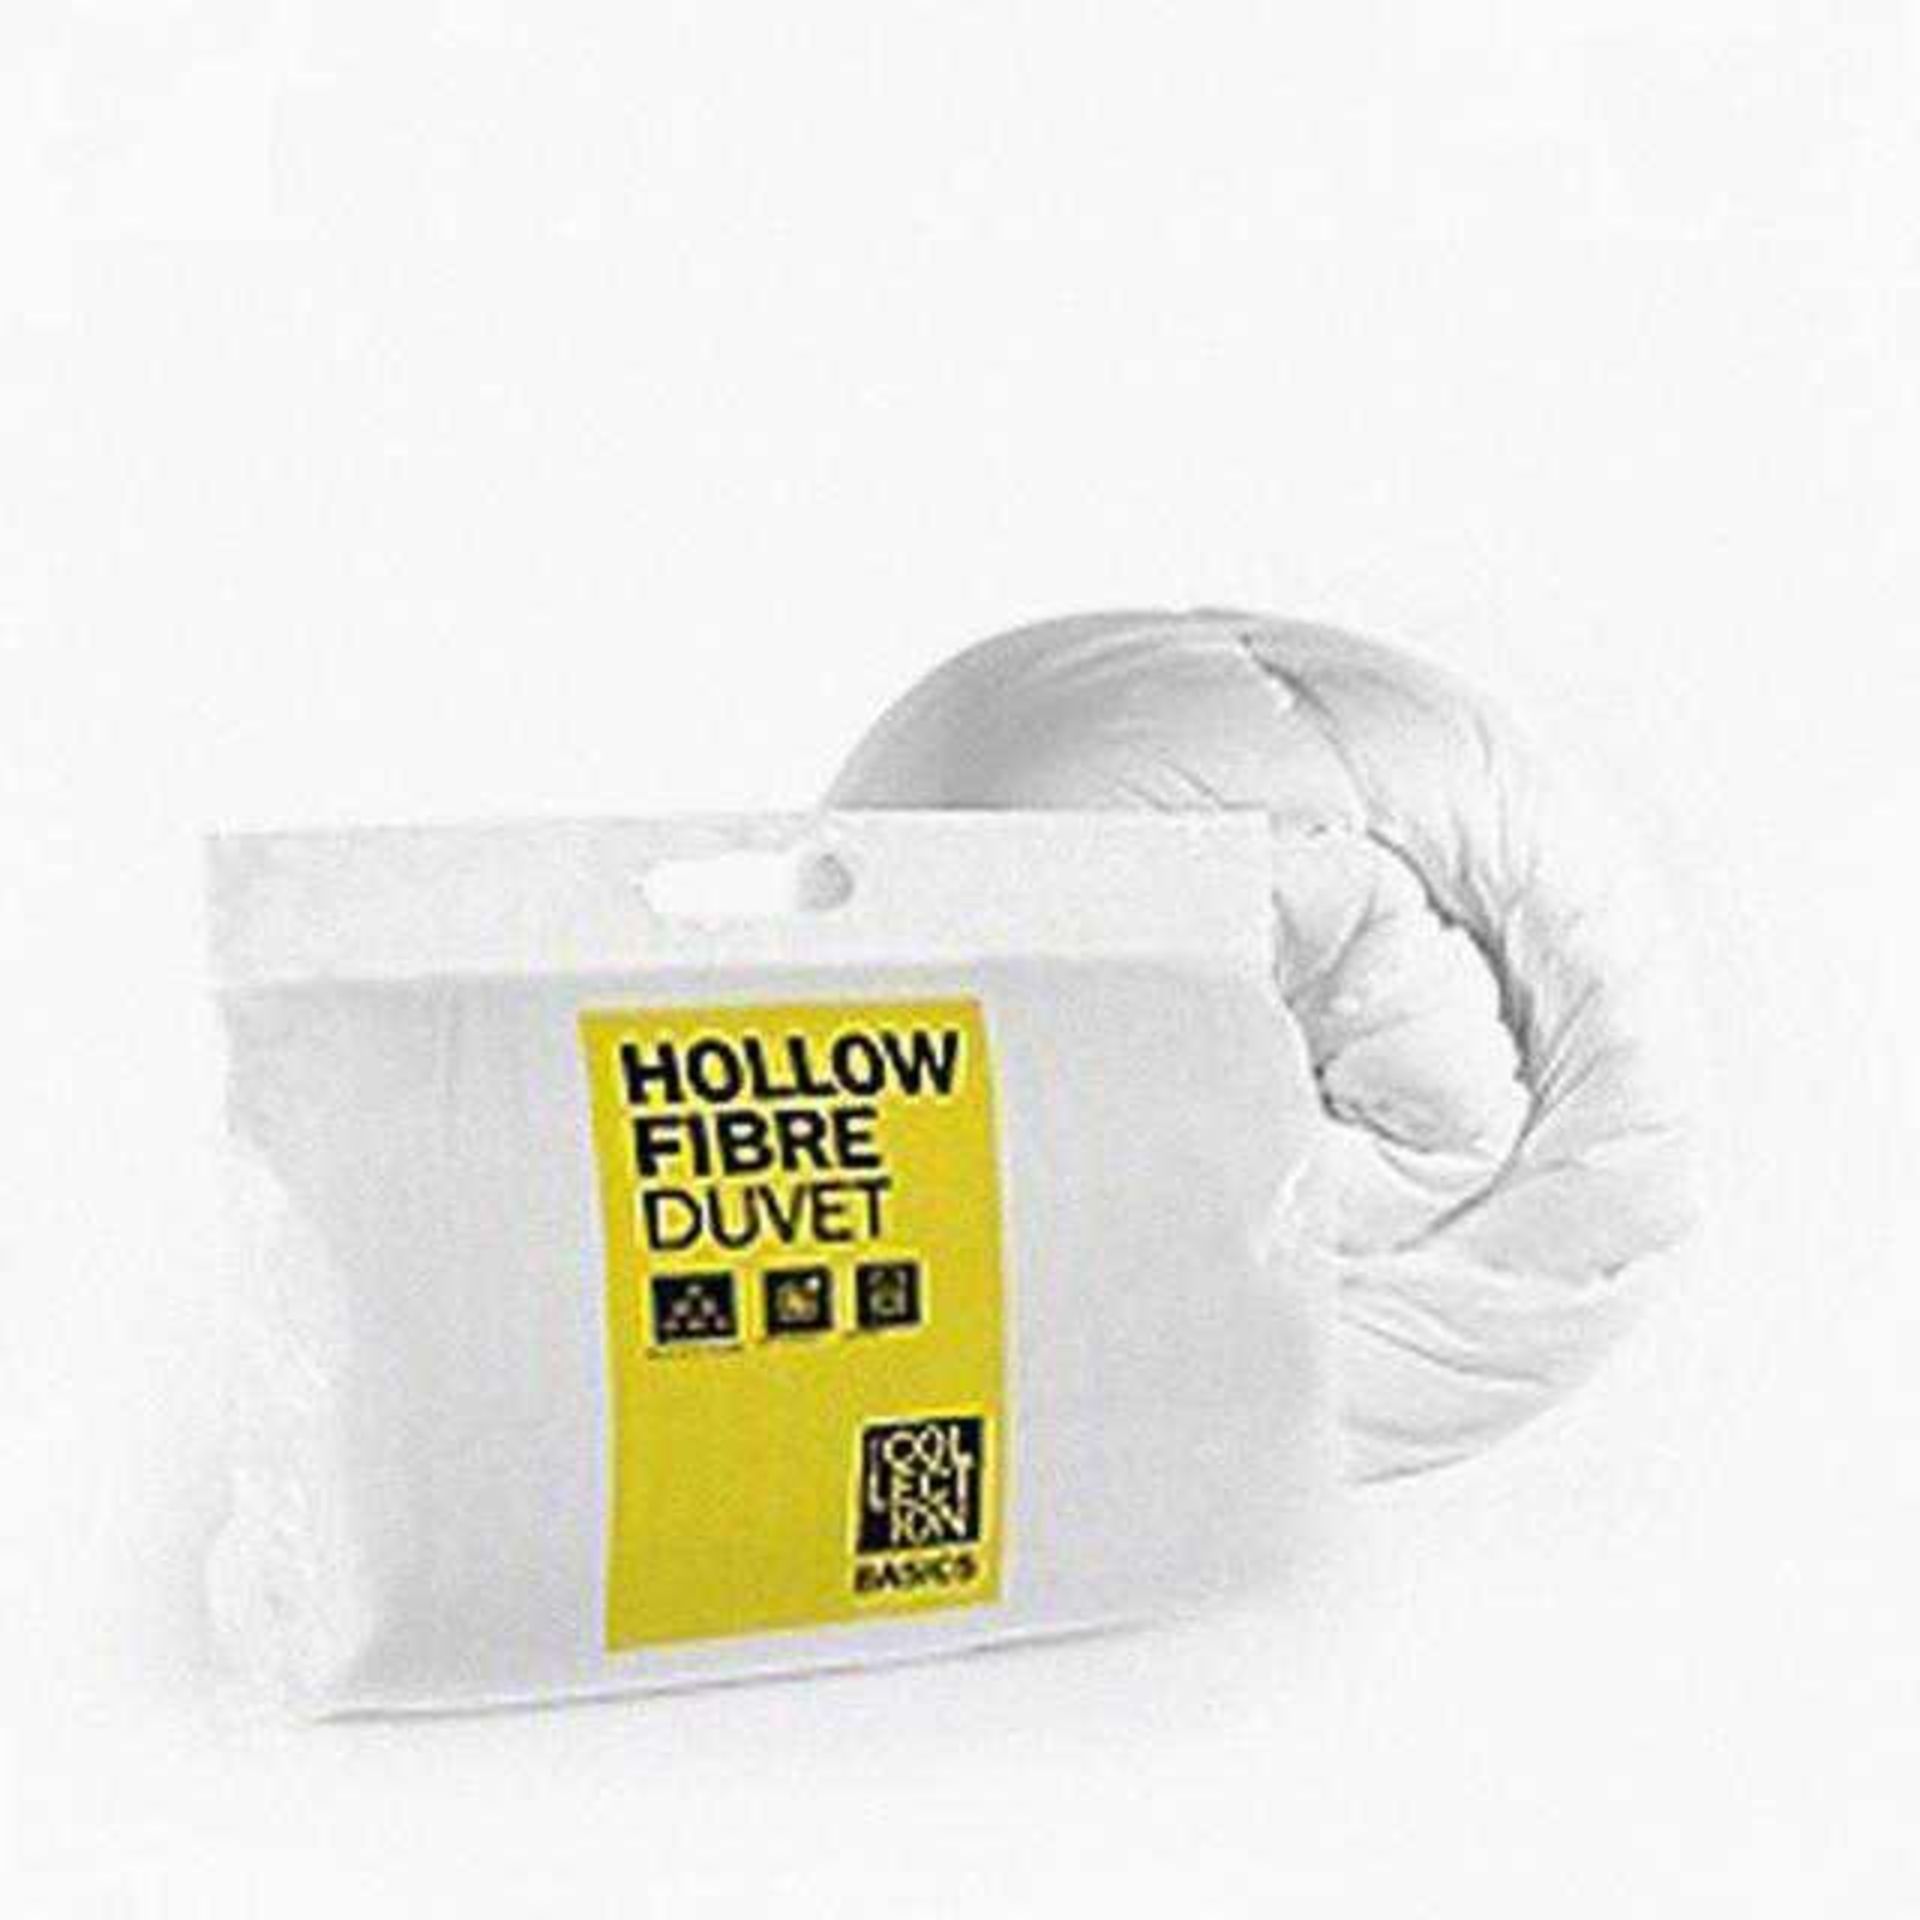 Rrp £85 Lot To Contain 2 Bagged Assorted Items To Include A Single 13.5Tog Hollow Fibre Duvet And A